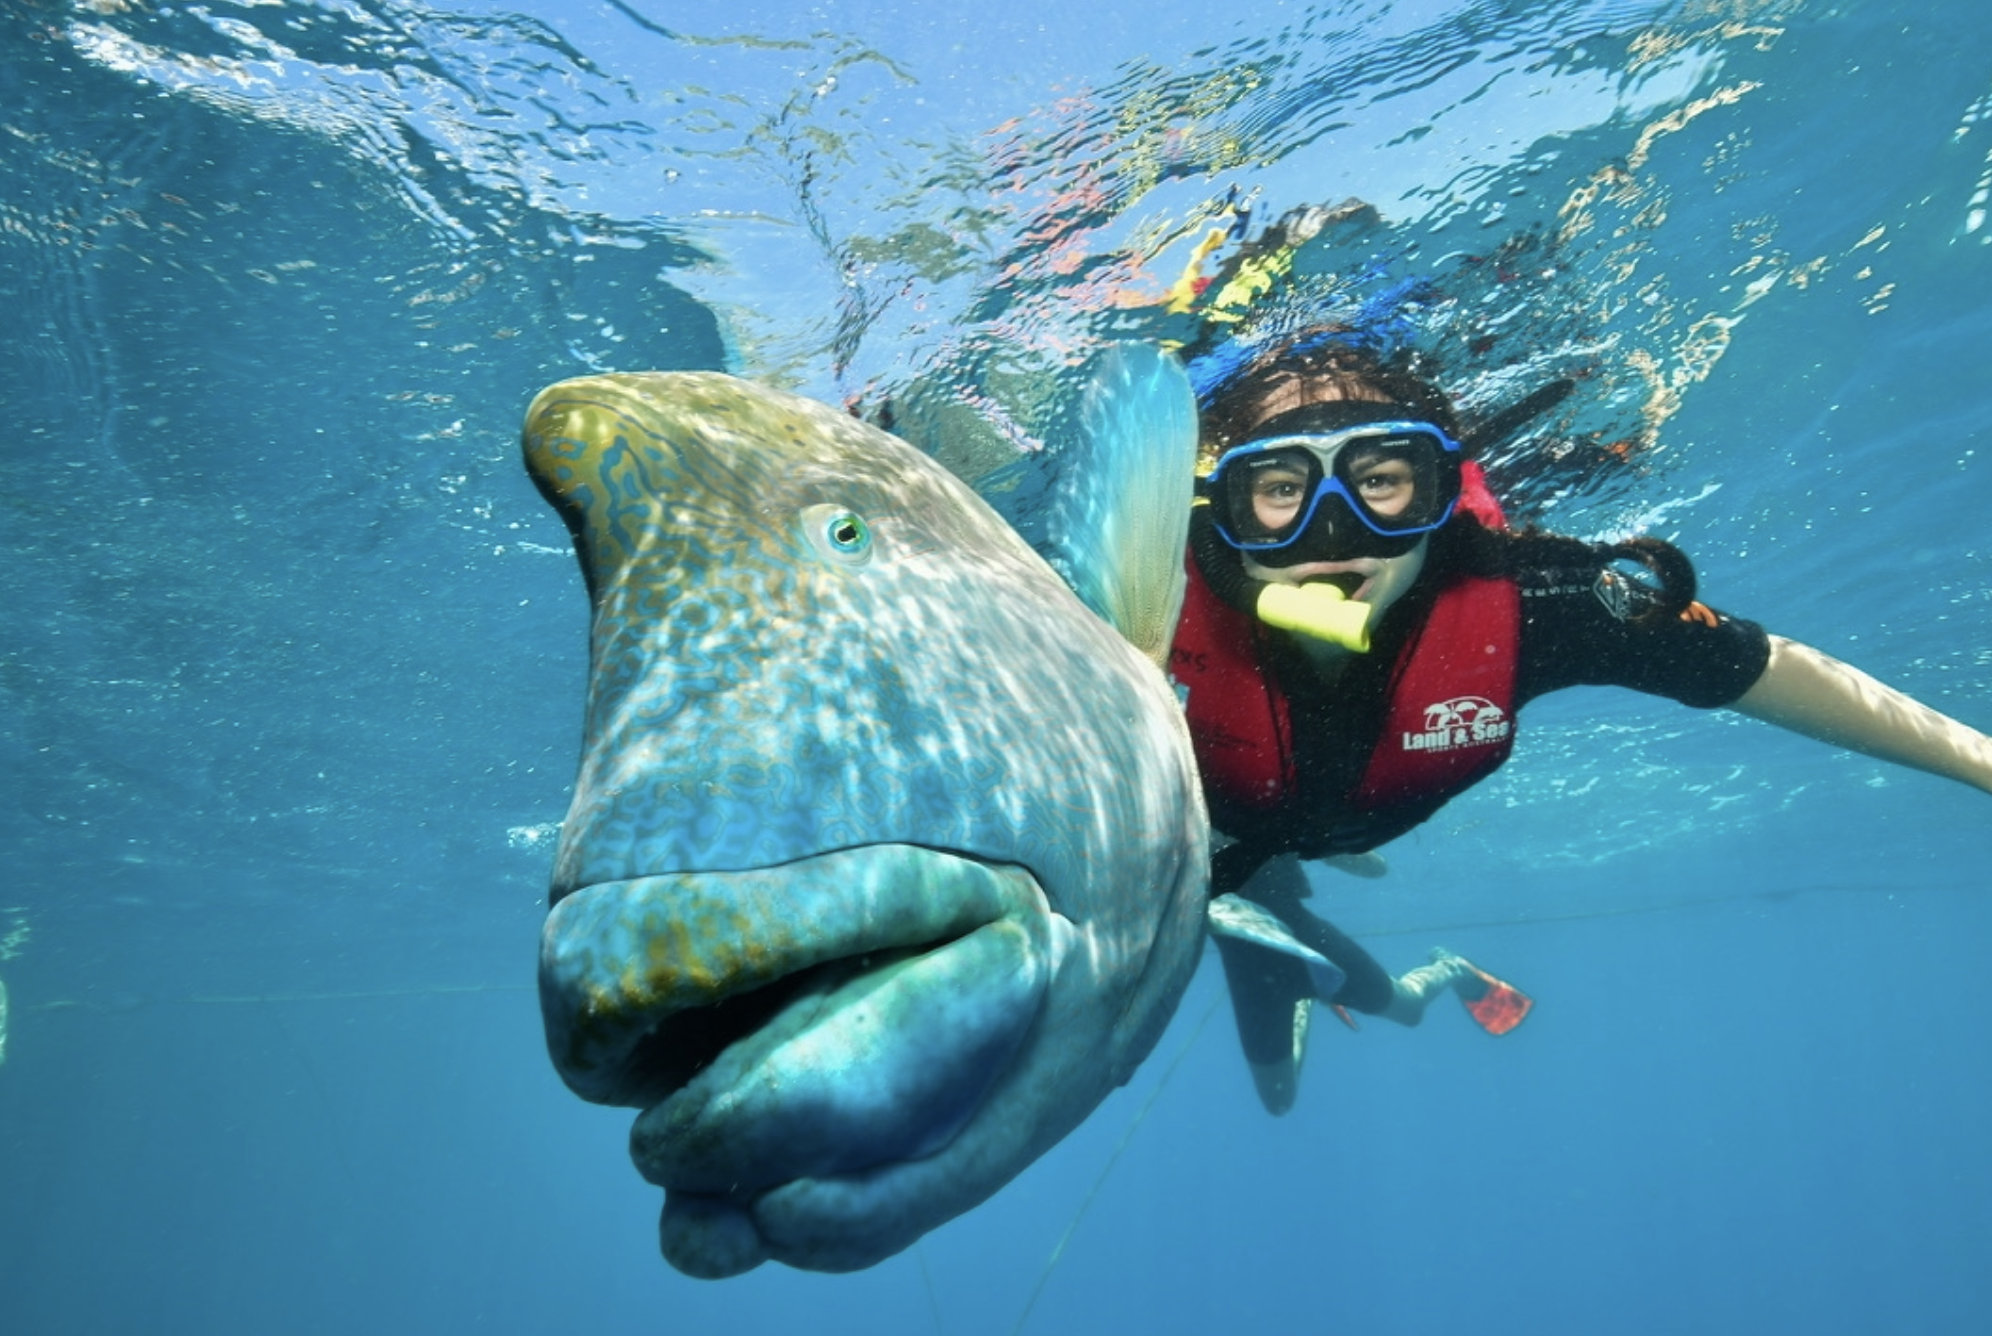 A study abroad student snorkels alongside a large fish in Australia.